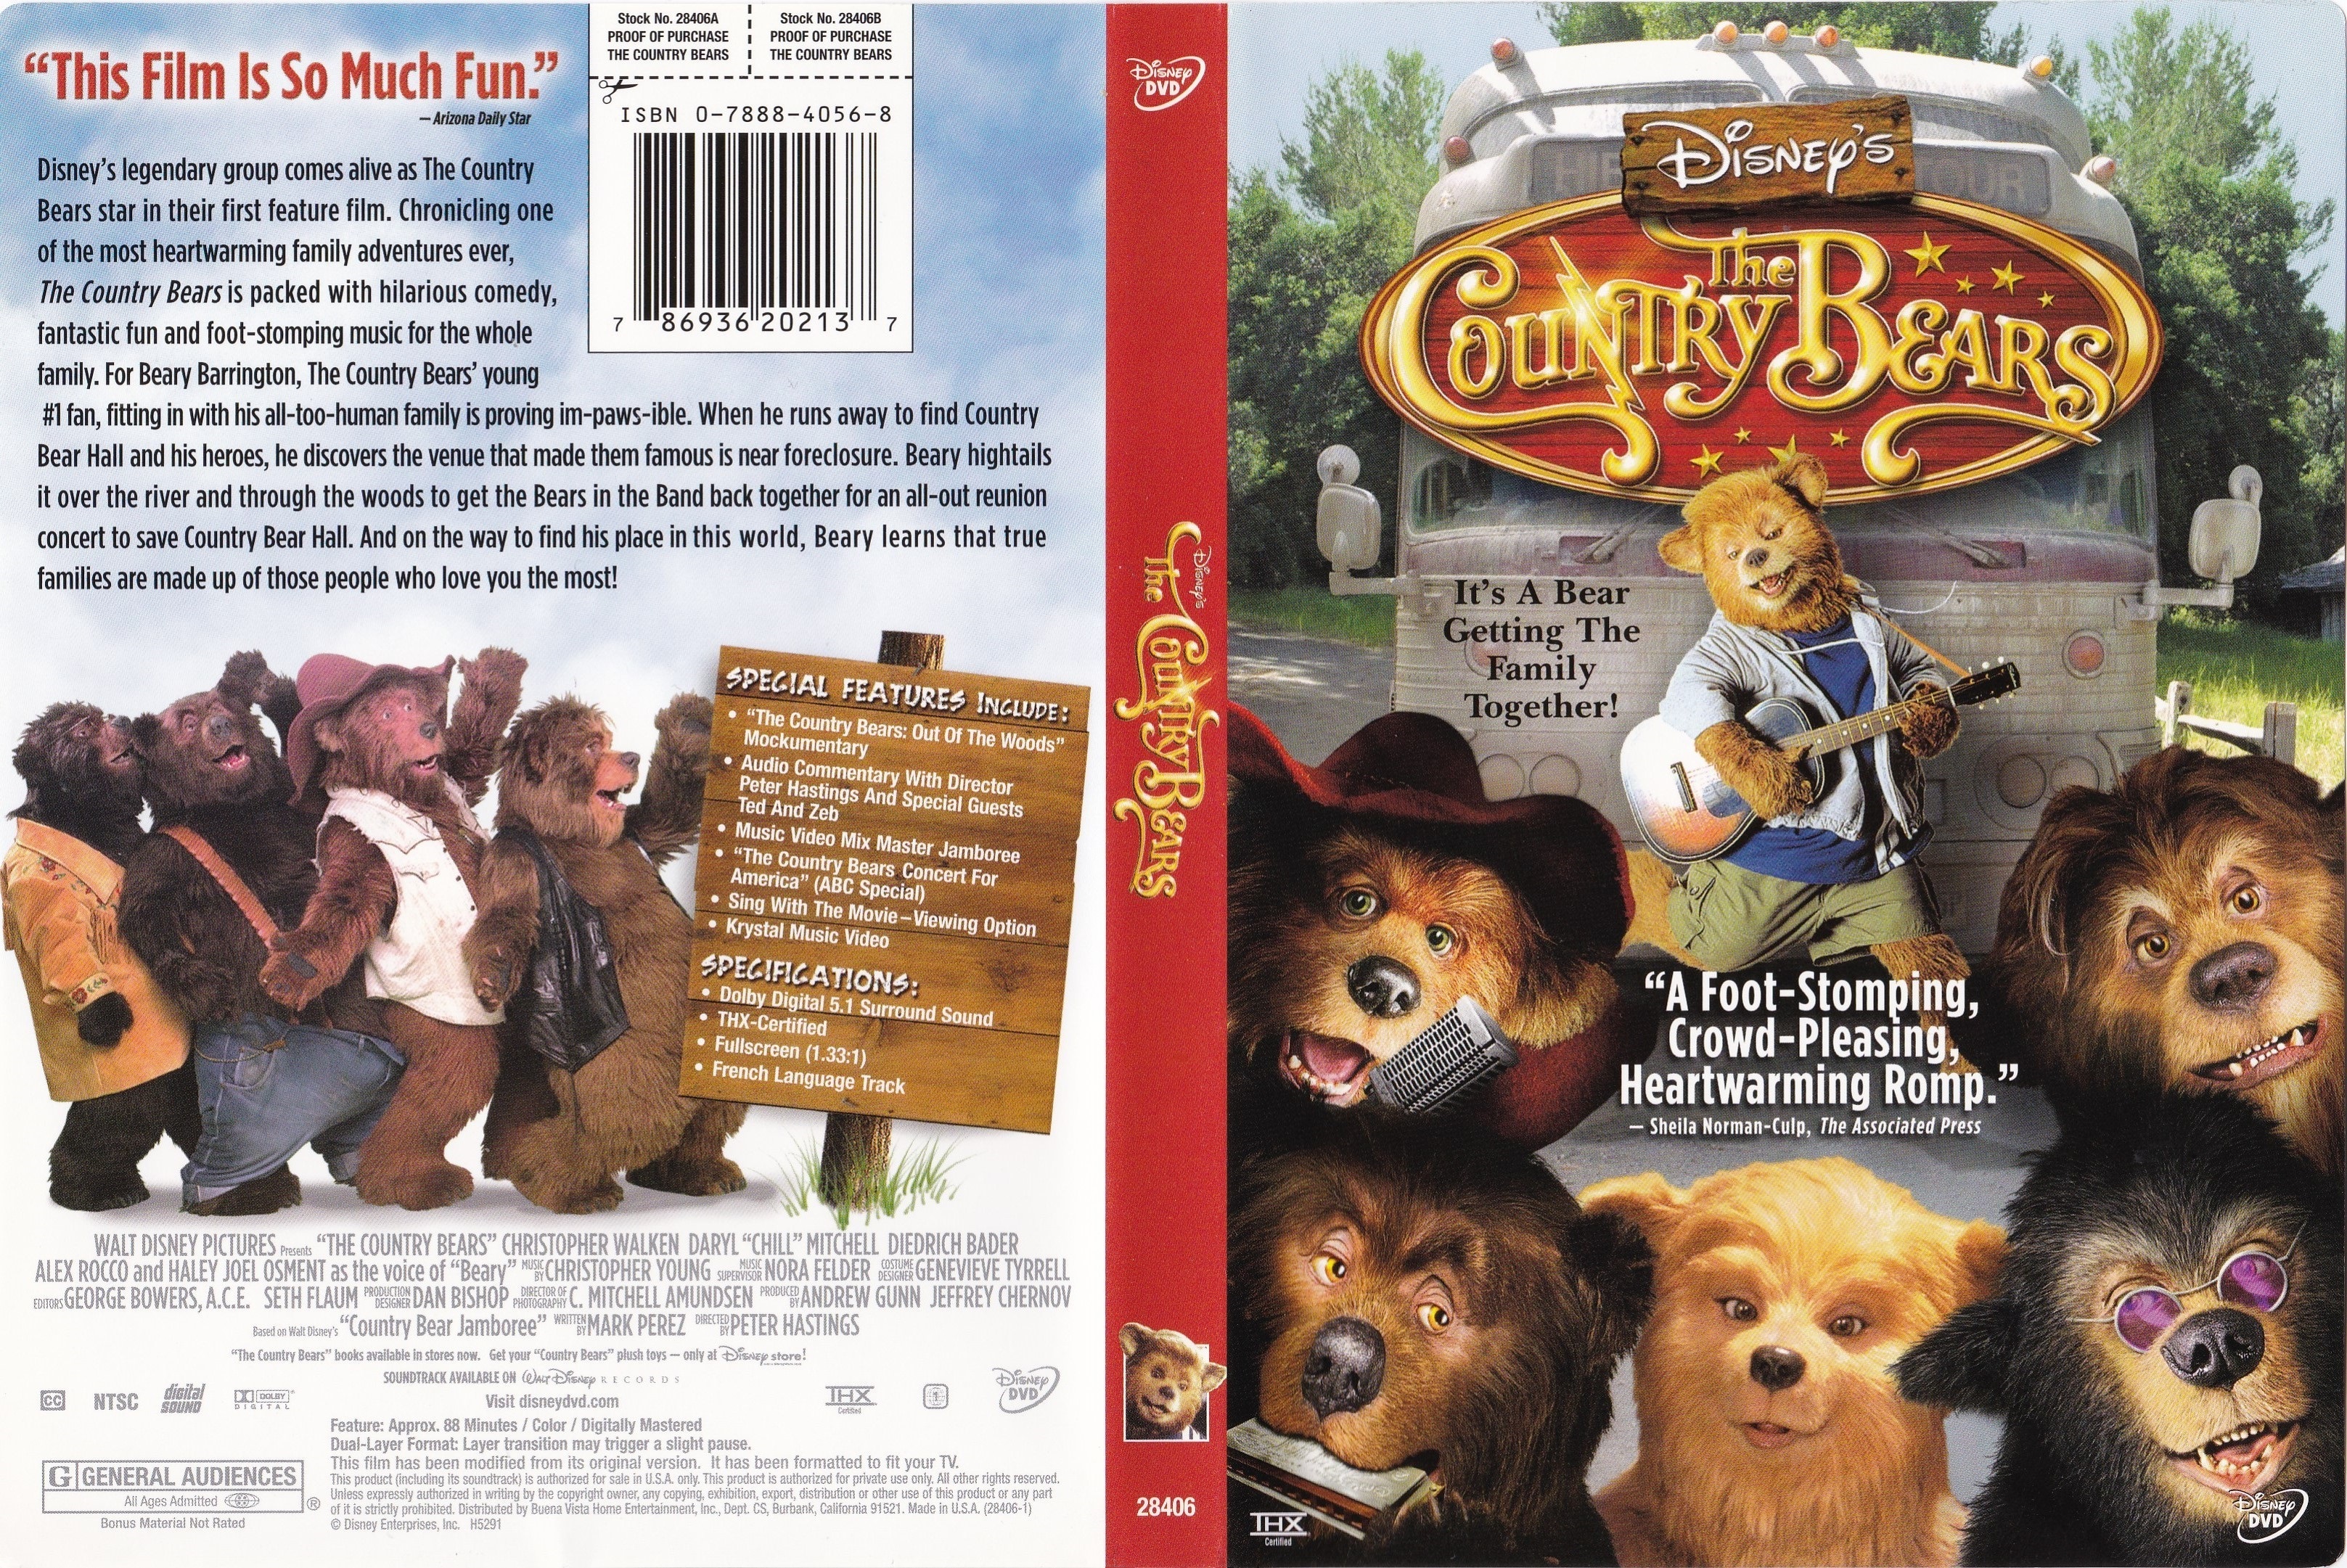 Jaquette DVD The Country Bears Zone 1